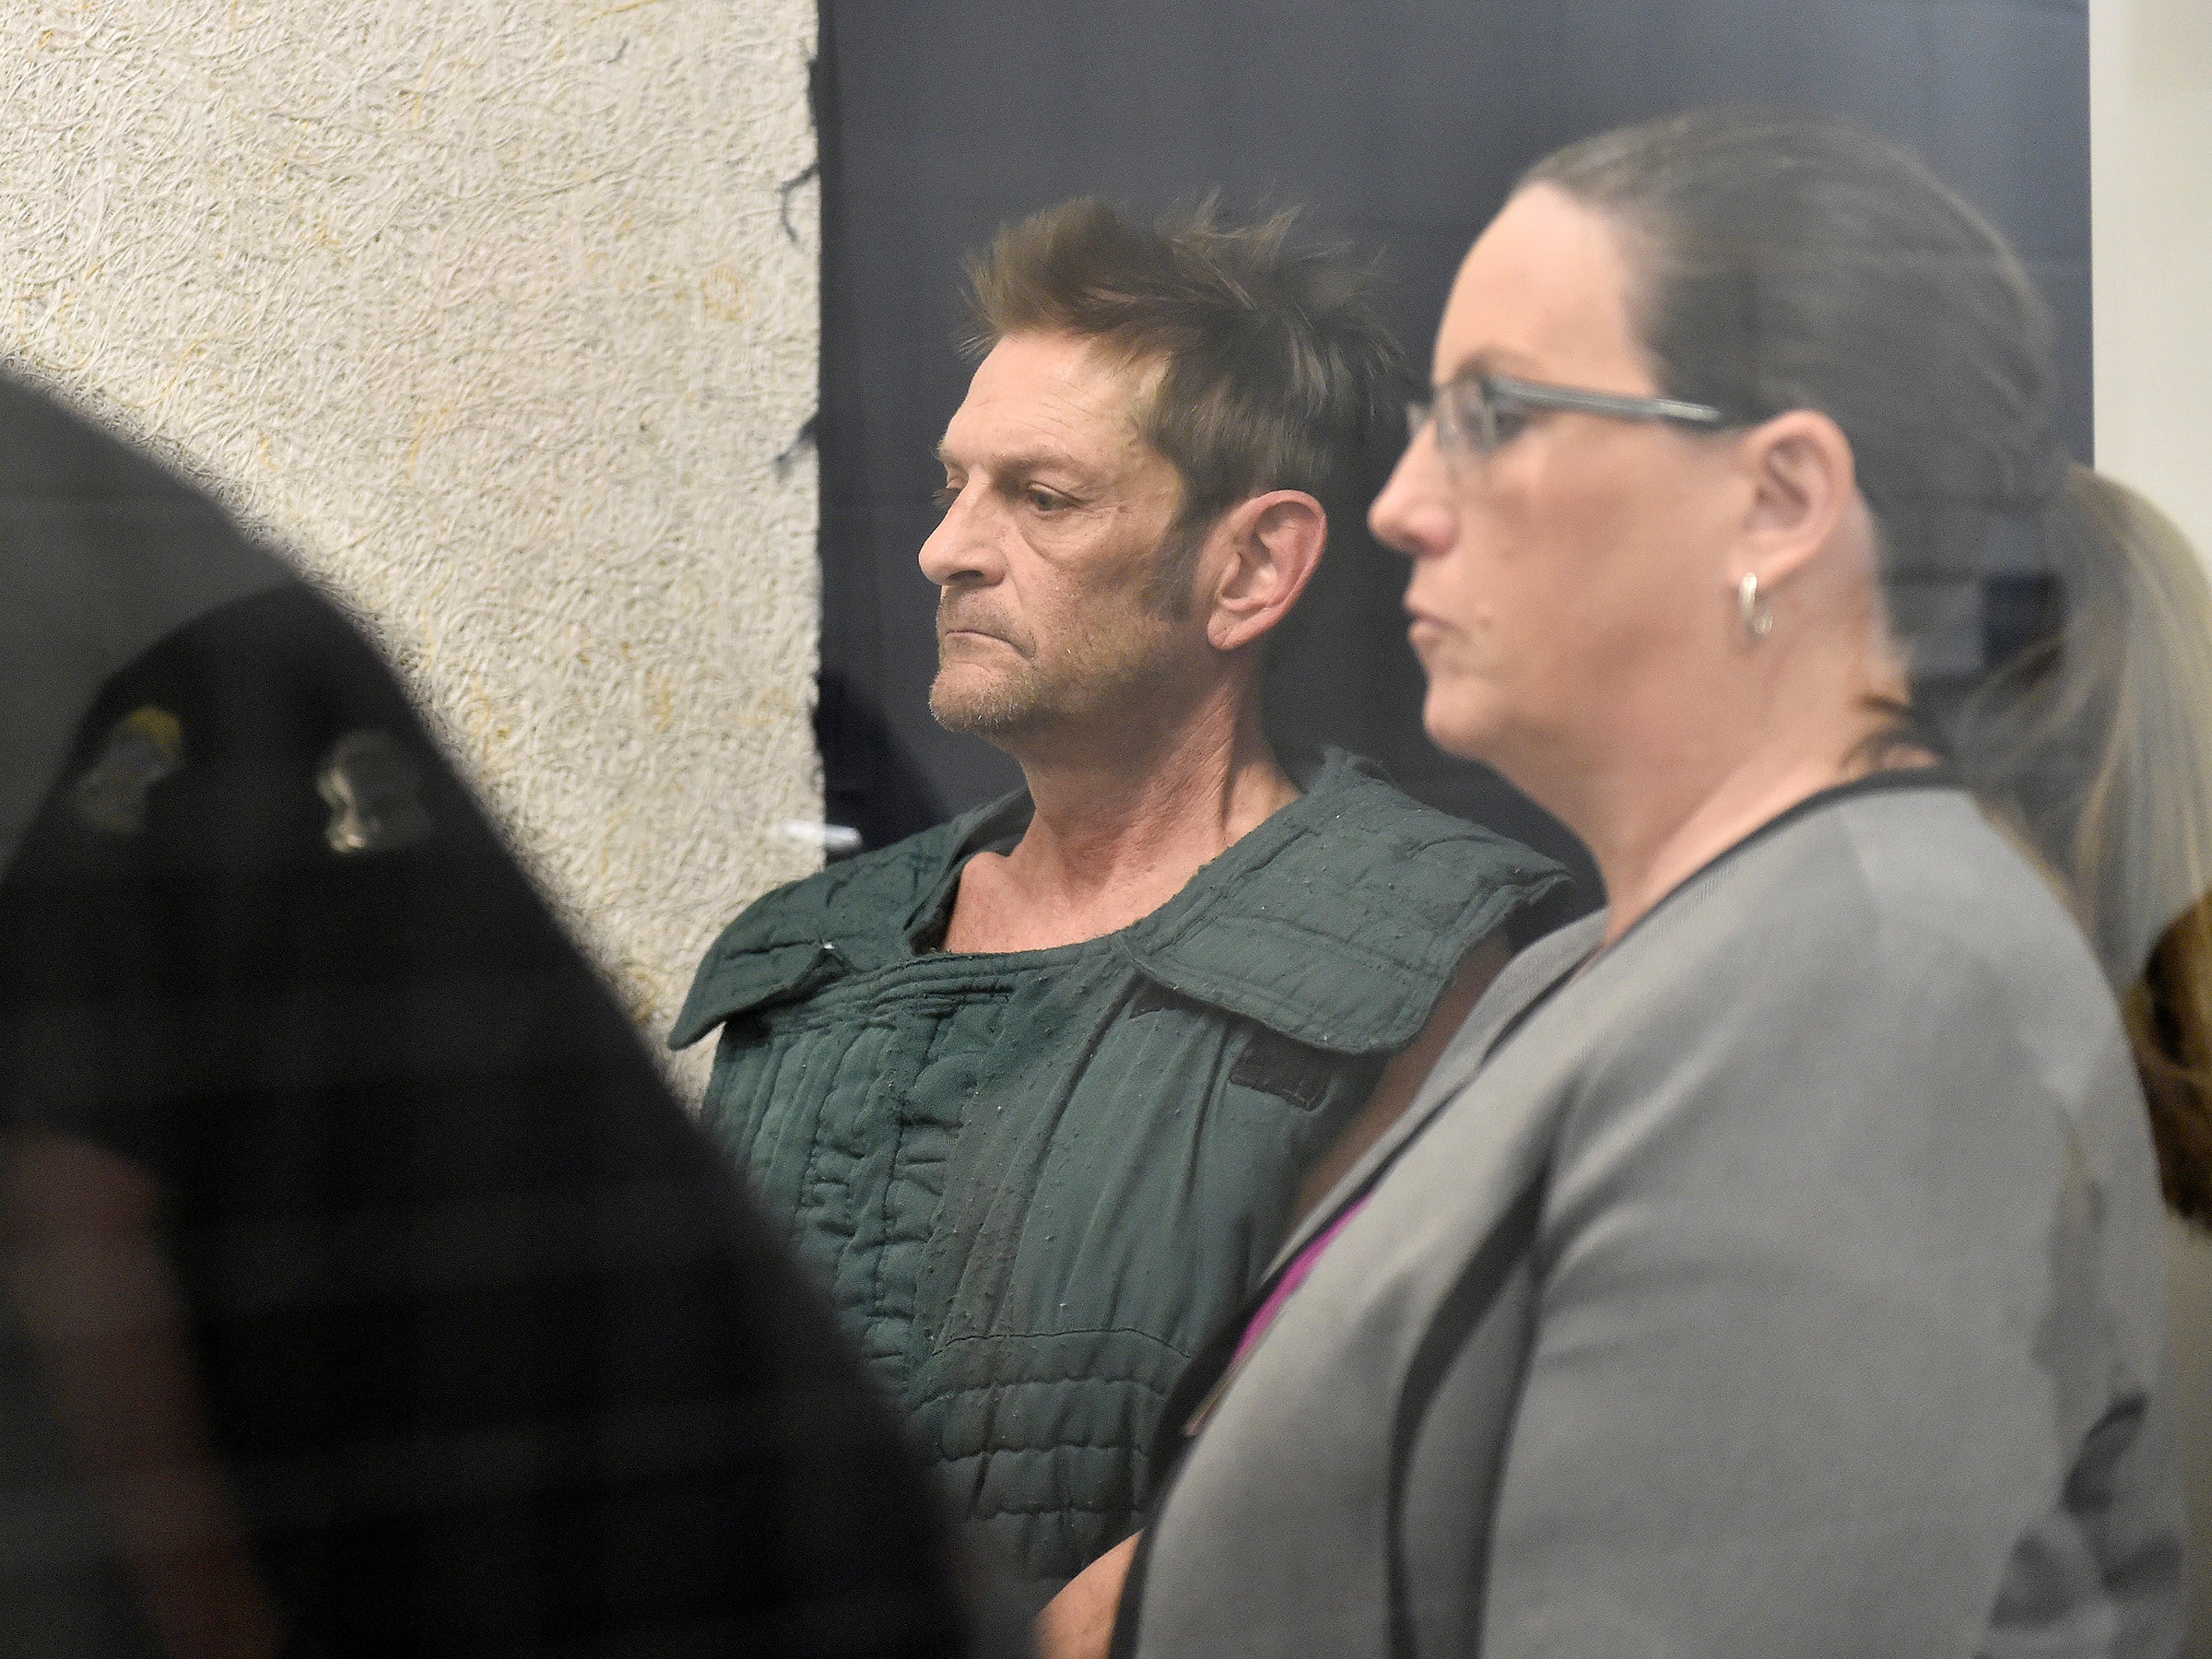 Adam Purinton, 51, appears with his public defender Michelle R. Durrett via video conference from jail during his initial court appearance in Olathe, Kansas